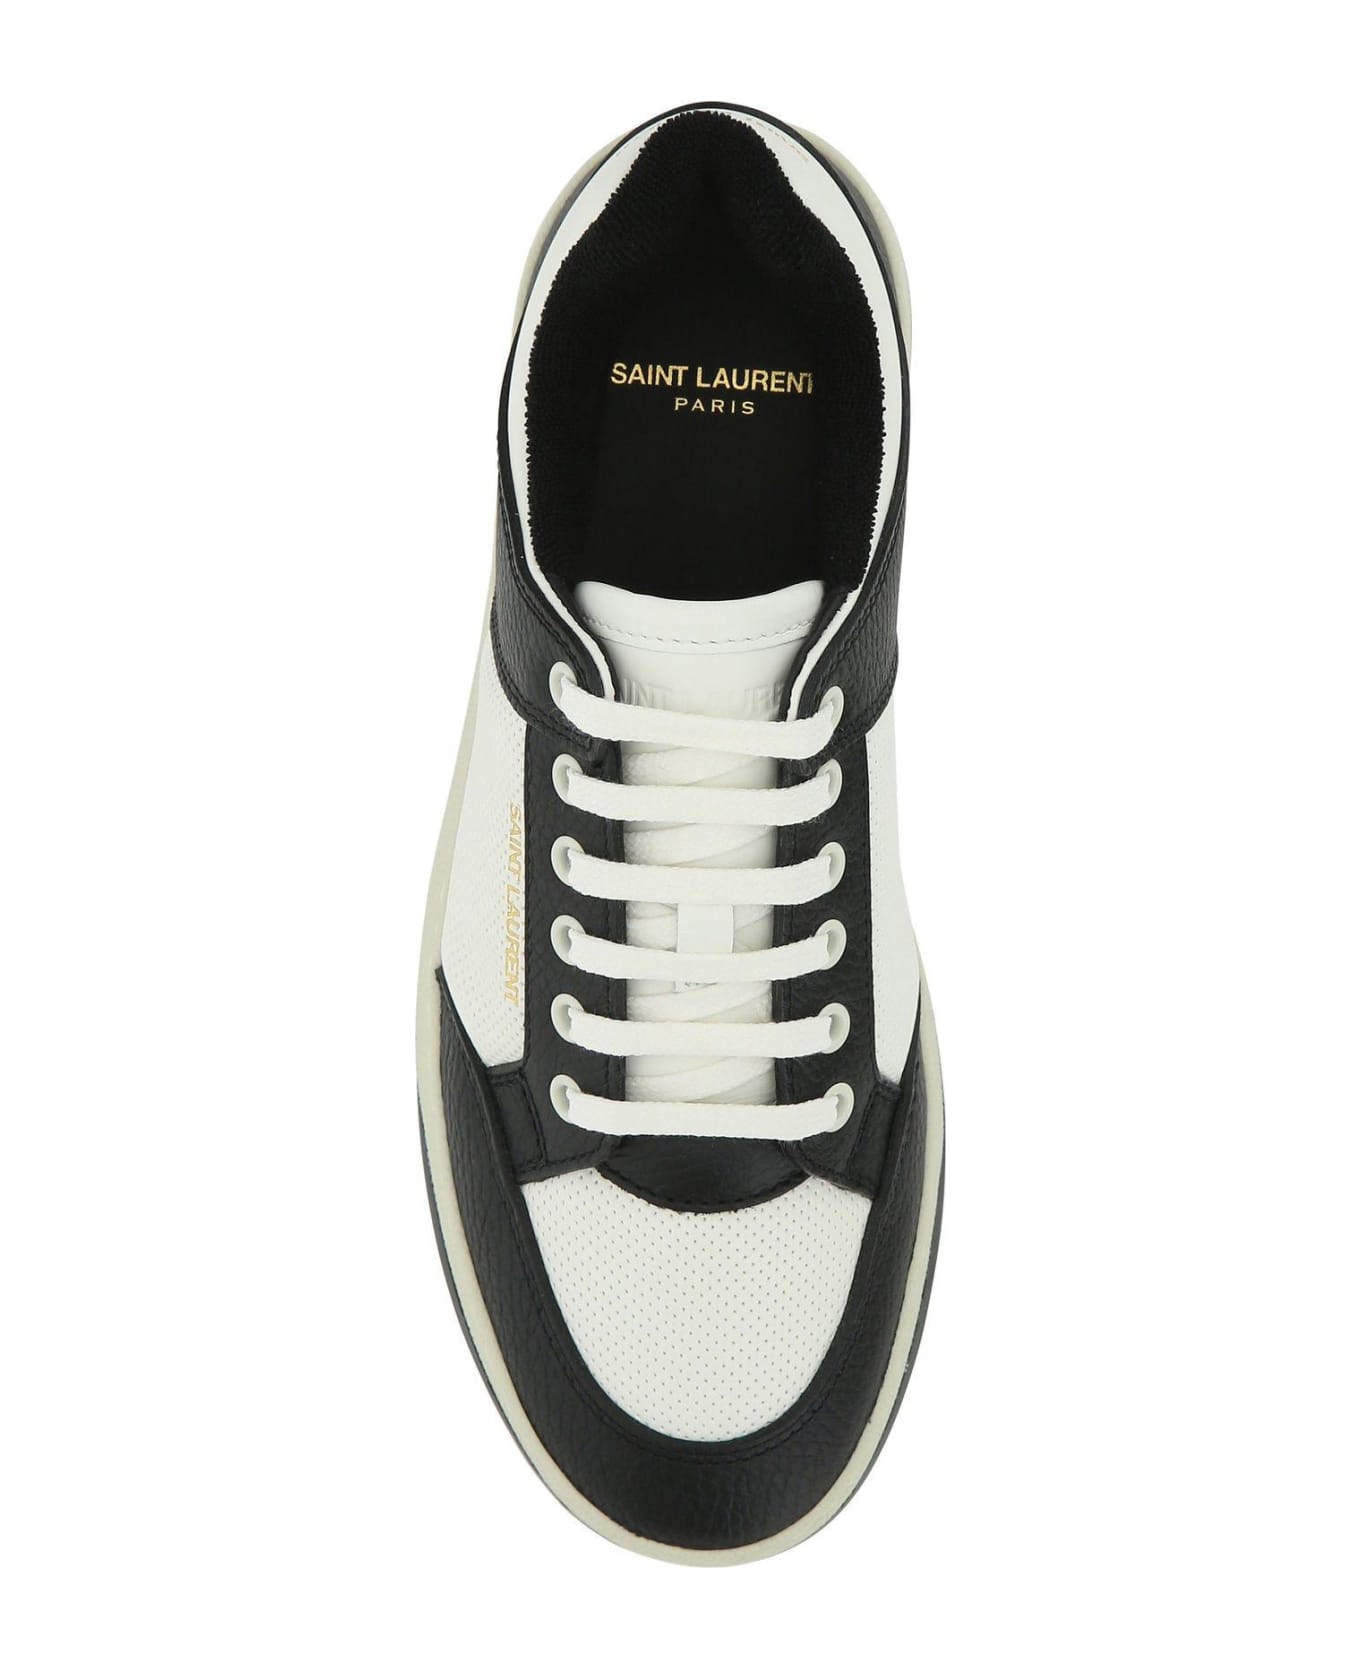 Saint Laurent Two-tone Leather Sl/61 Sneakers - BROWN